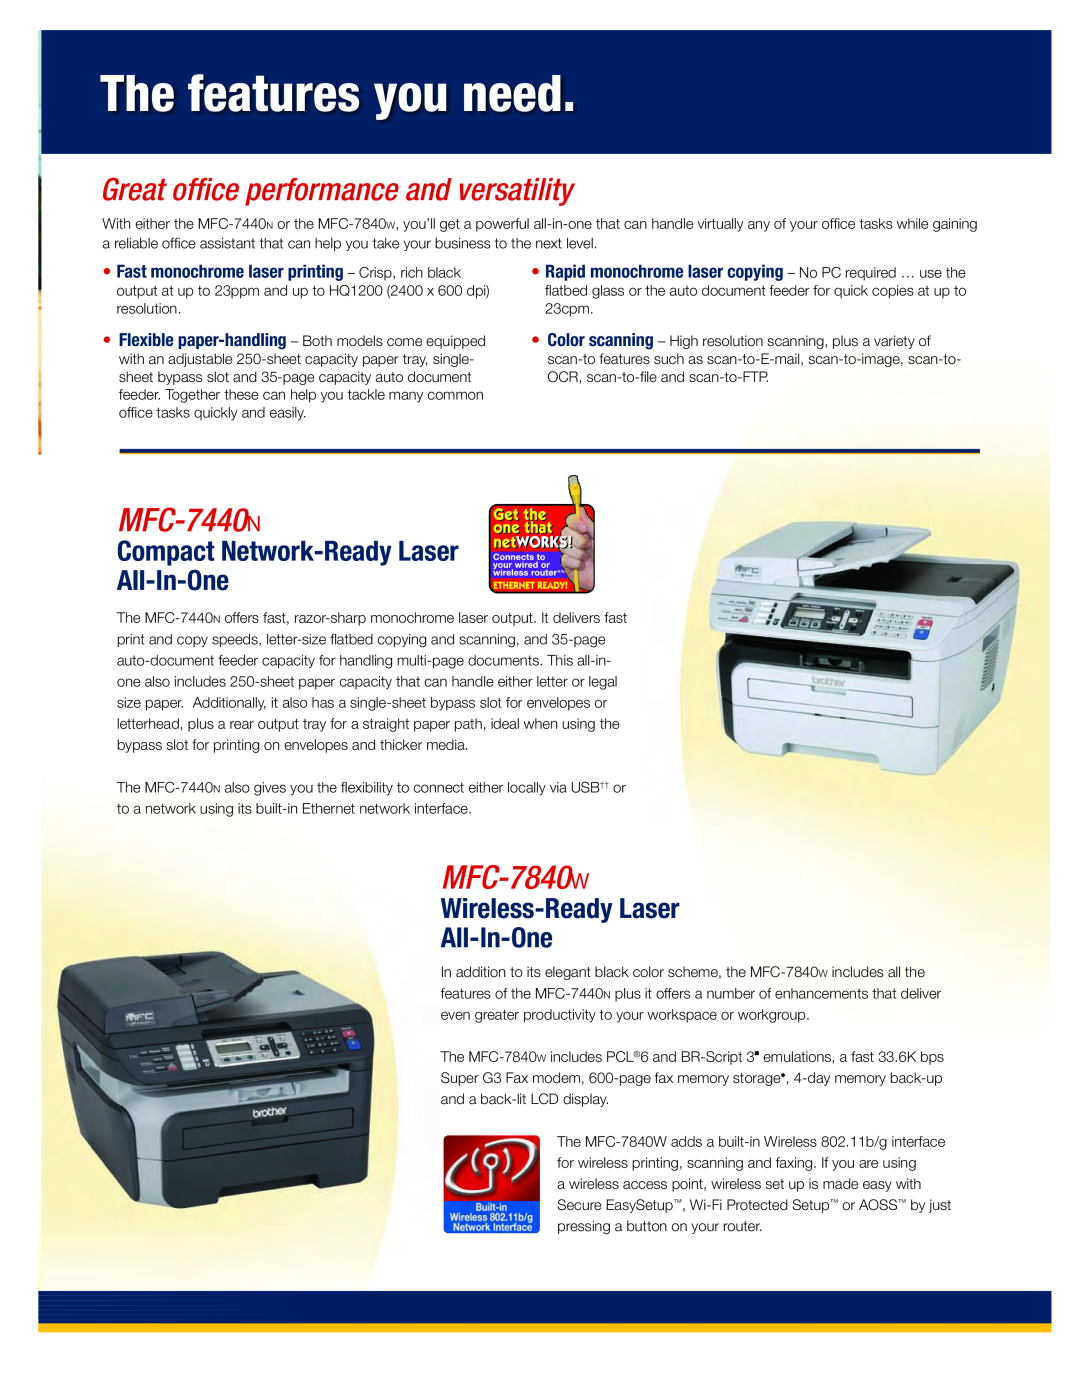 Brother MFC-7000 manual The features you need, MFC-7440n, MFC-7840w, Great office performance and versatility 